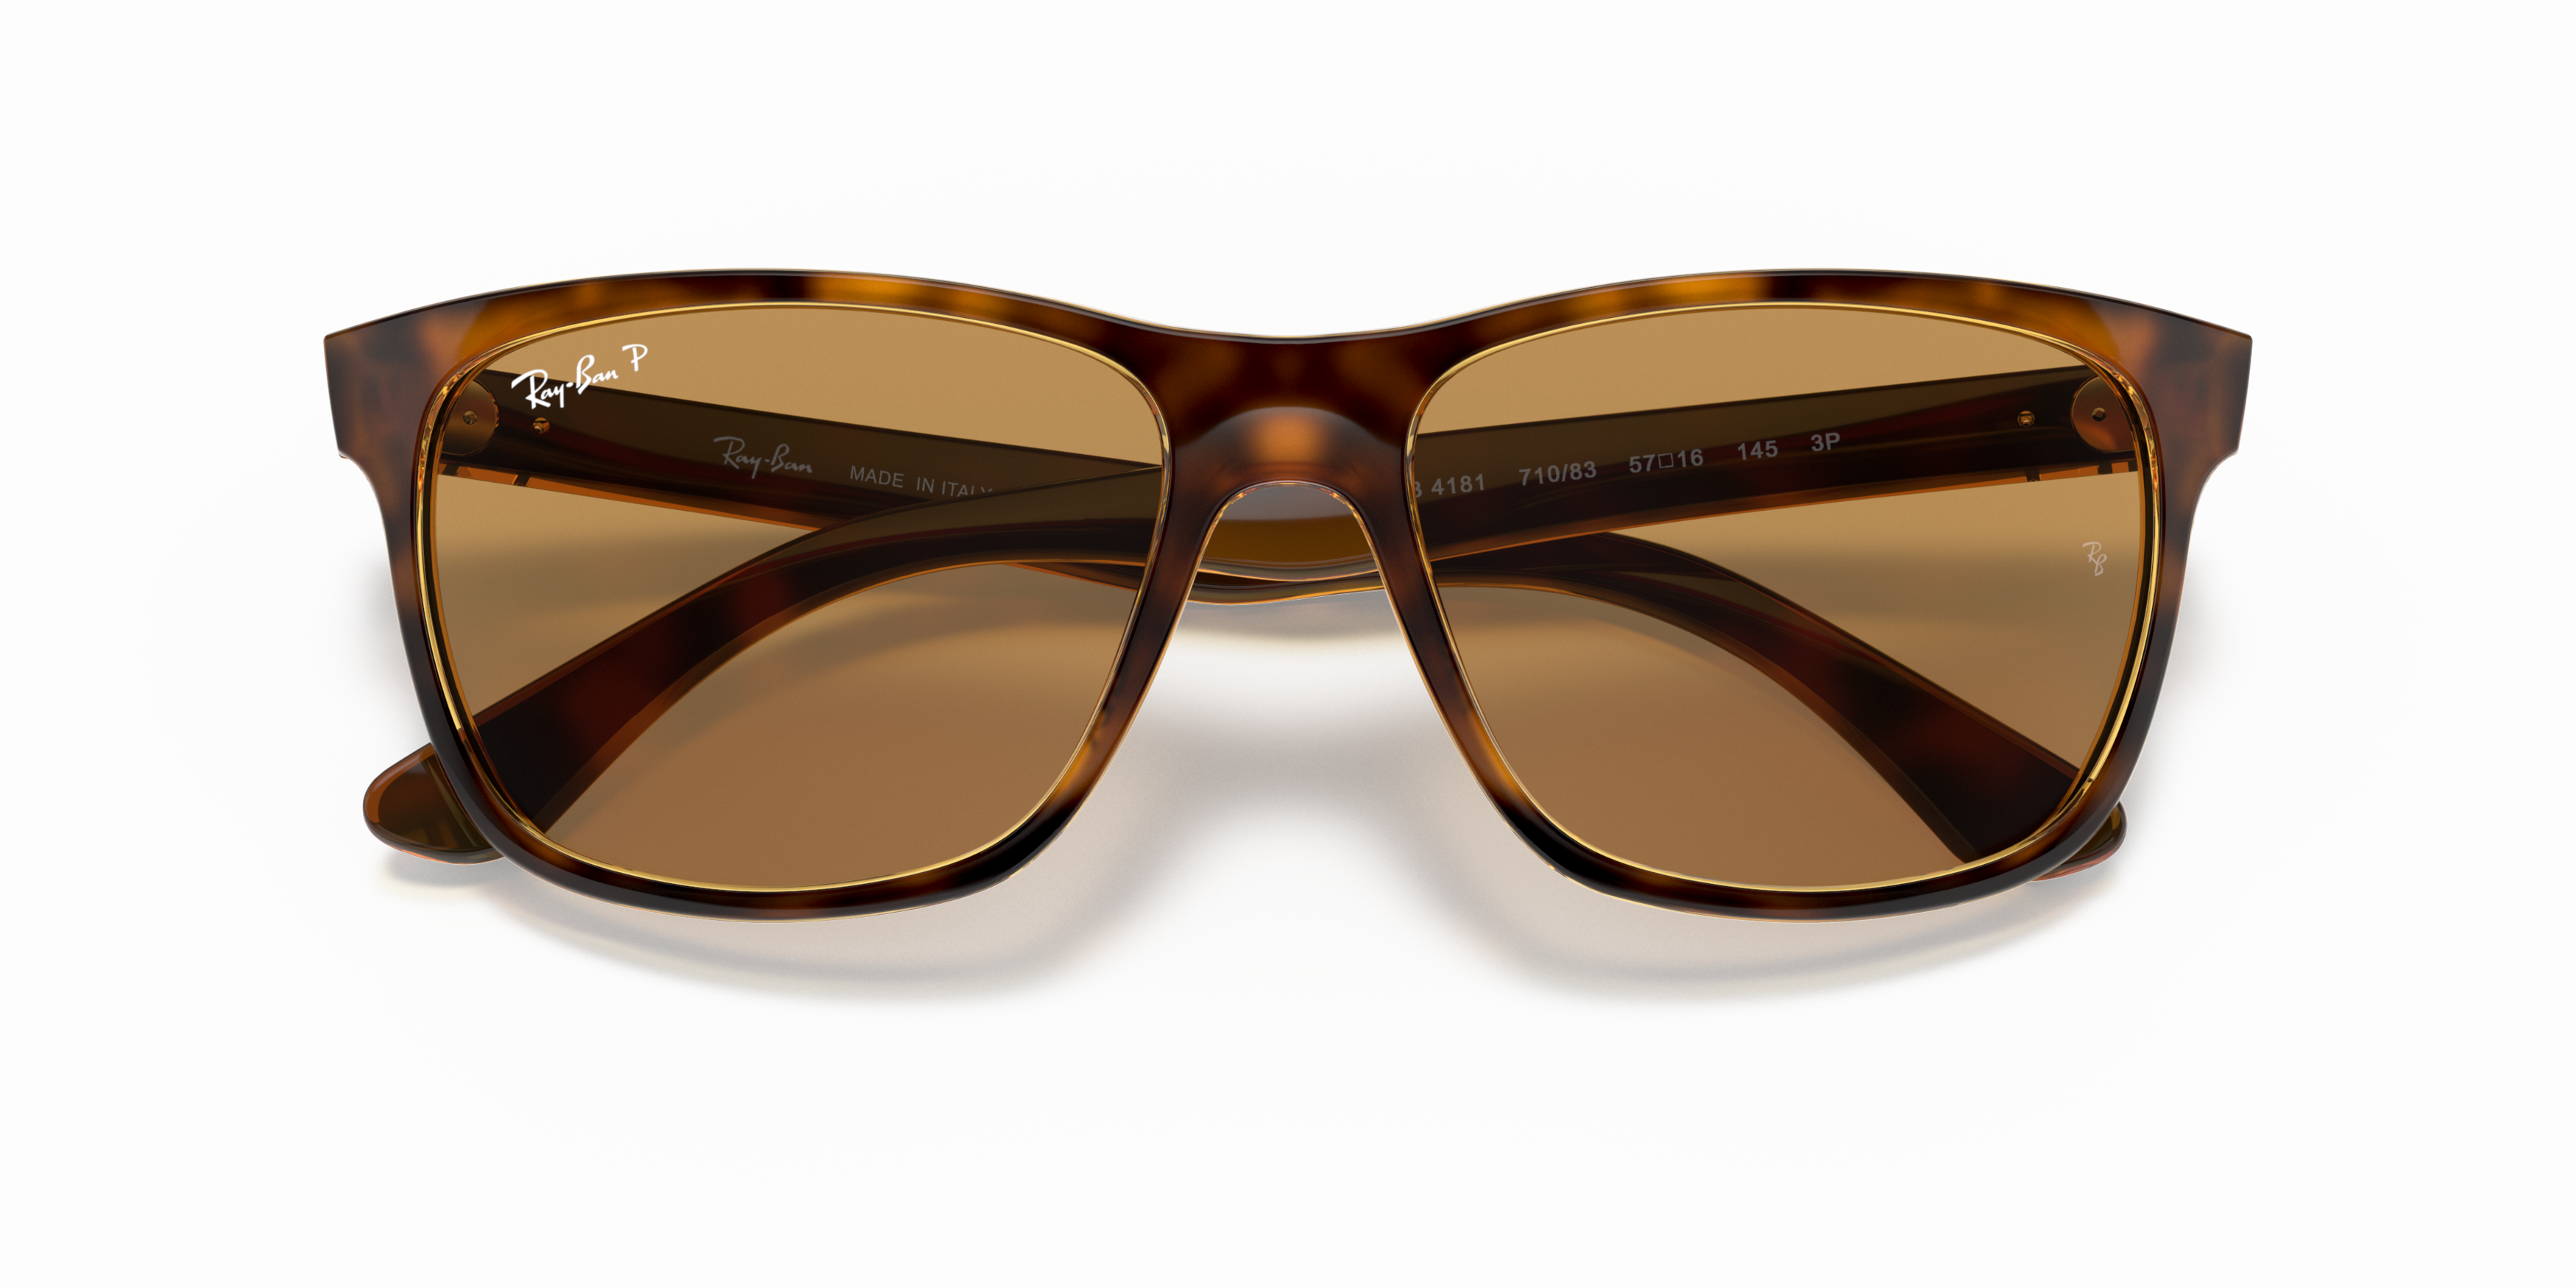 [products.image.folded] RAY-BAN RB4181 710/83